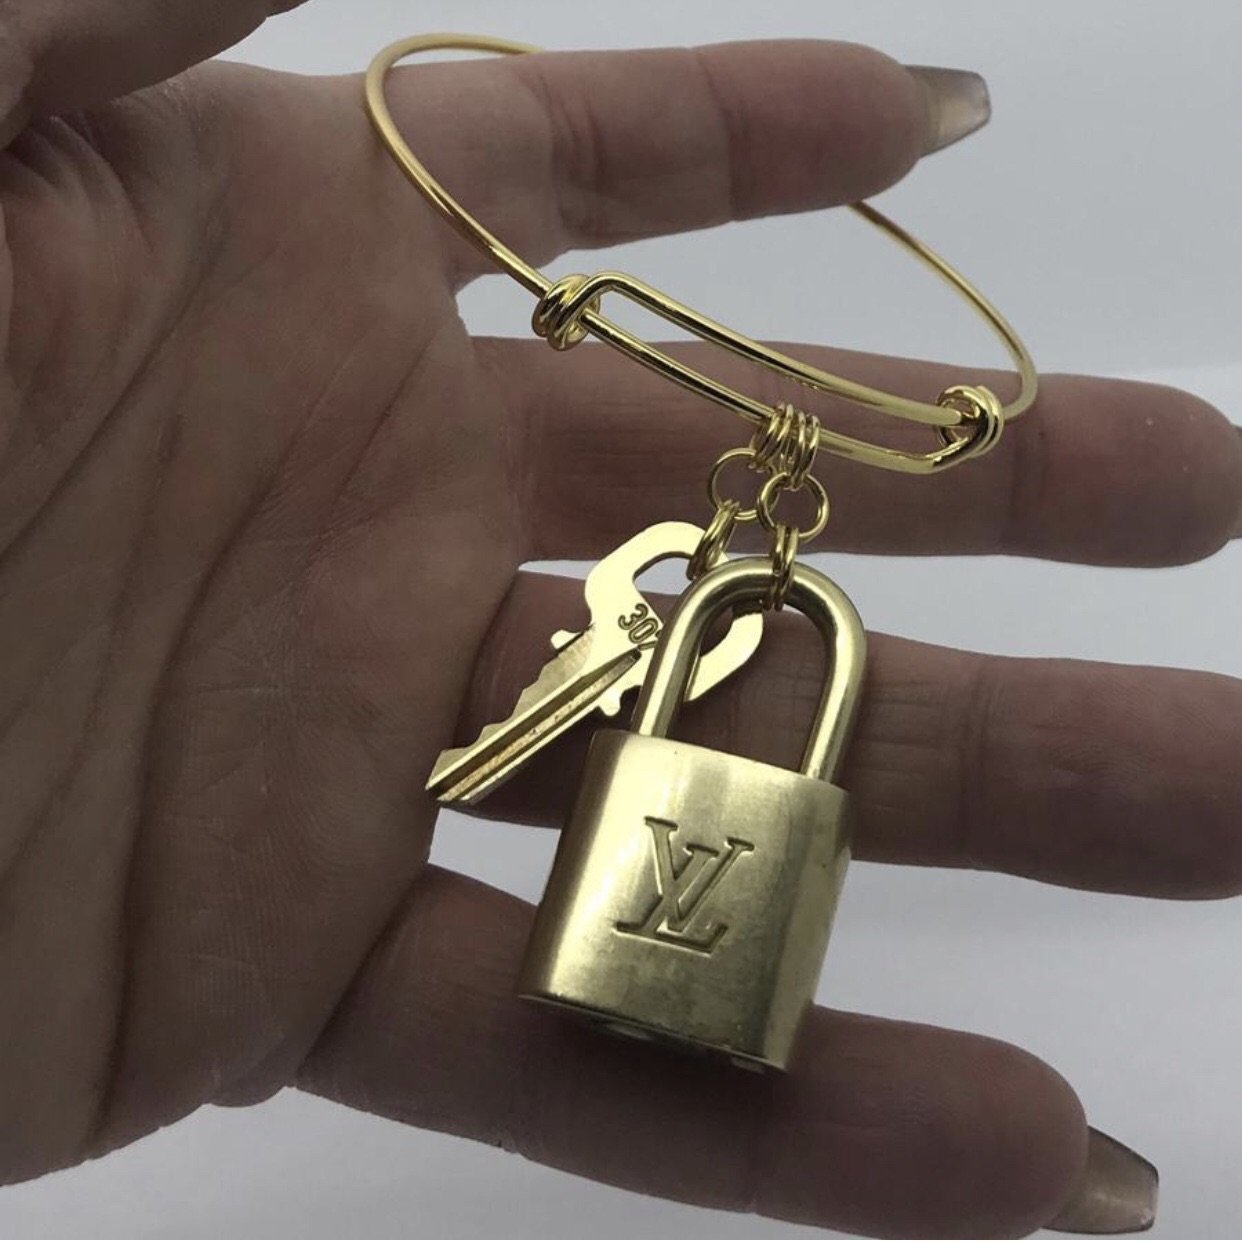 Lv clover lock and key kada 🥰😍 Material: Stainless steel Colour: Rosegold